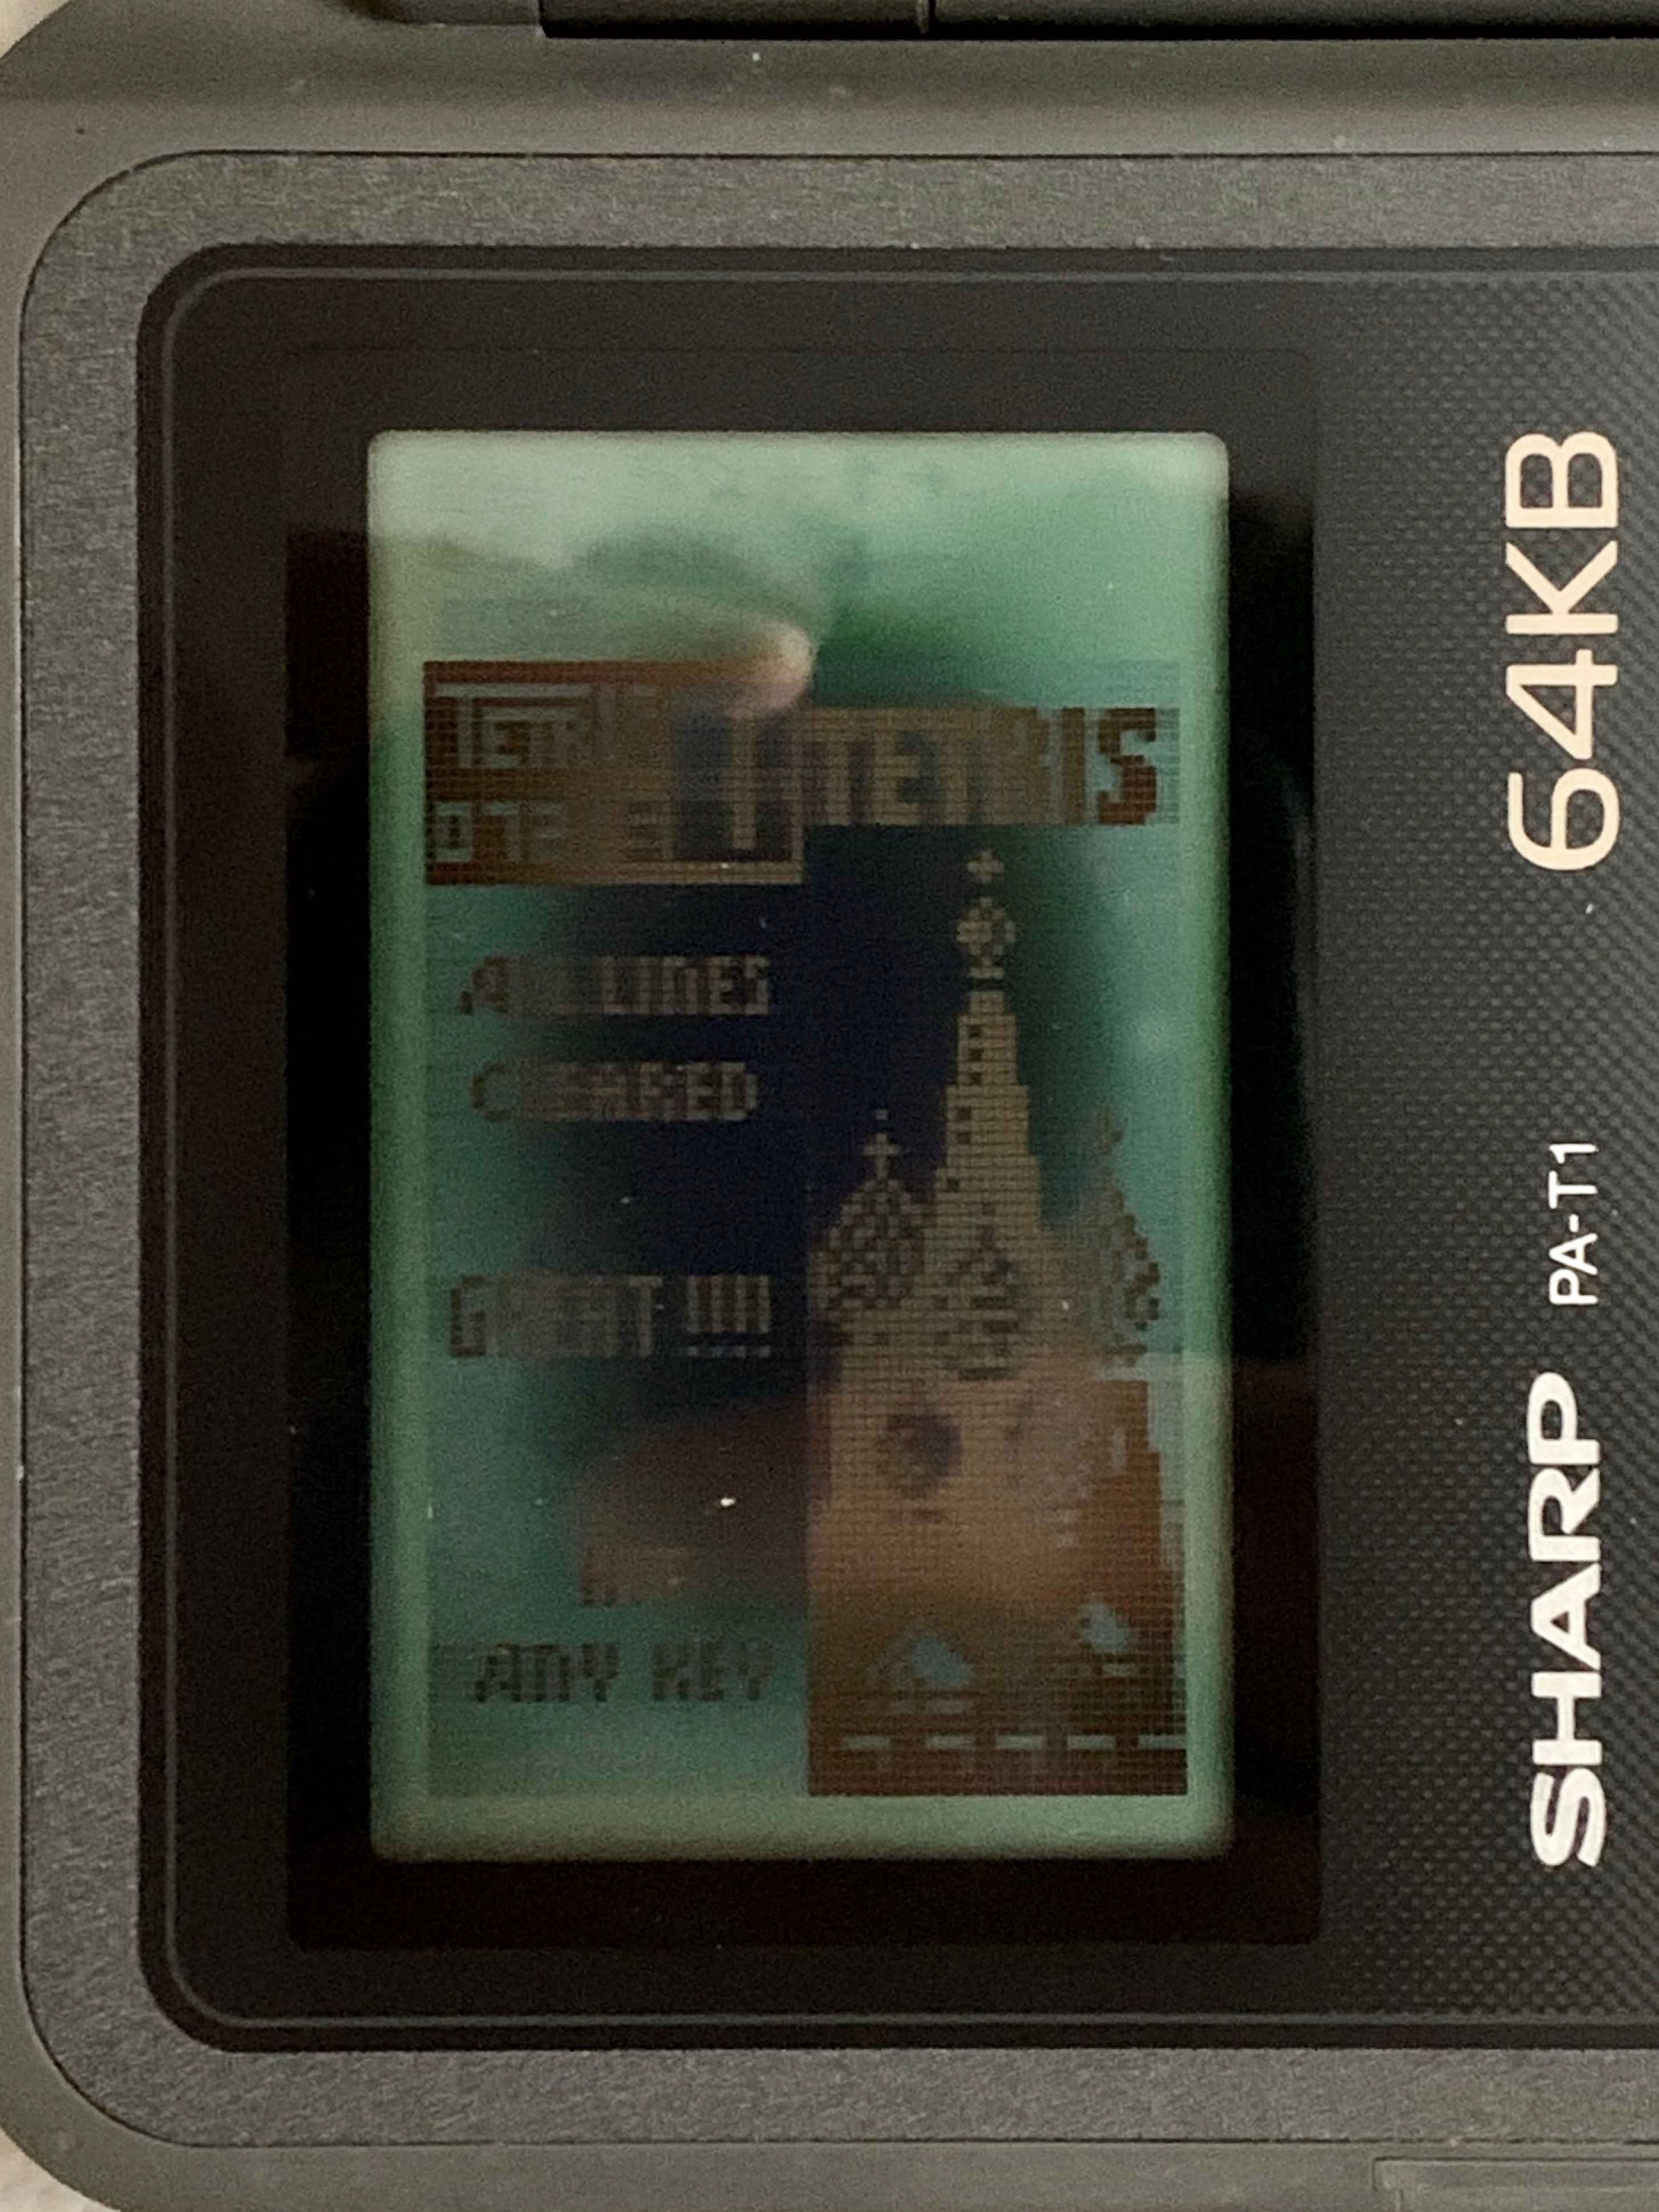 A cropped closeup of the screen of the Sharp PA-S1, the screen shows the endscreen after the Tetris game is completed. It says 'All lines cleared / Great! / Hit any key' with a pixelixed rendtion of Saint Basil's Cathedral next to the text.